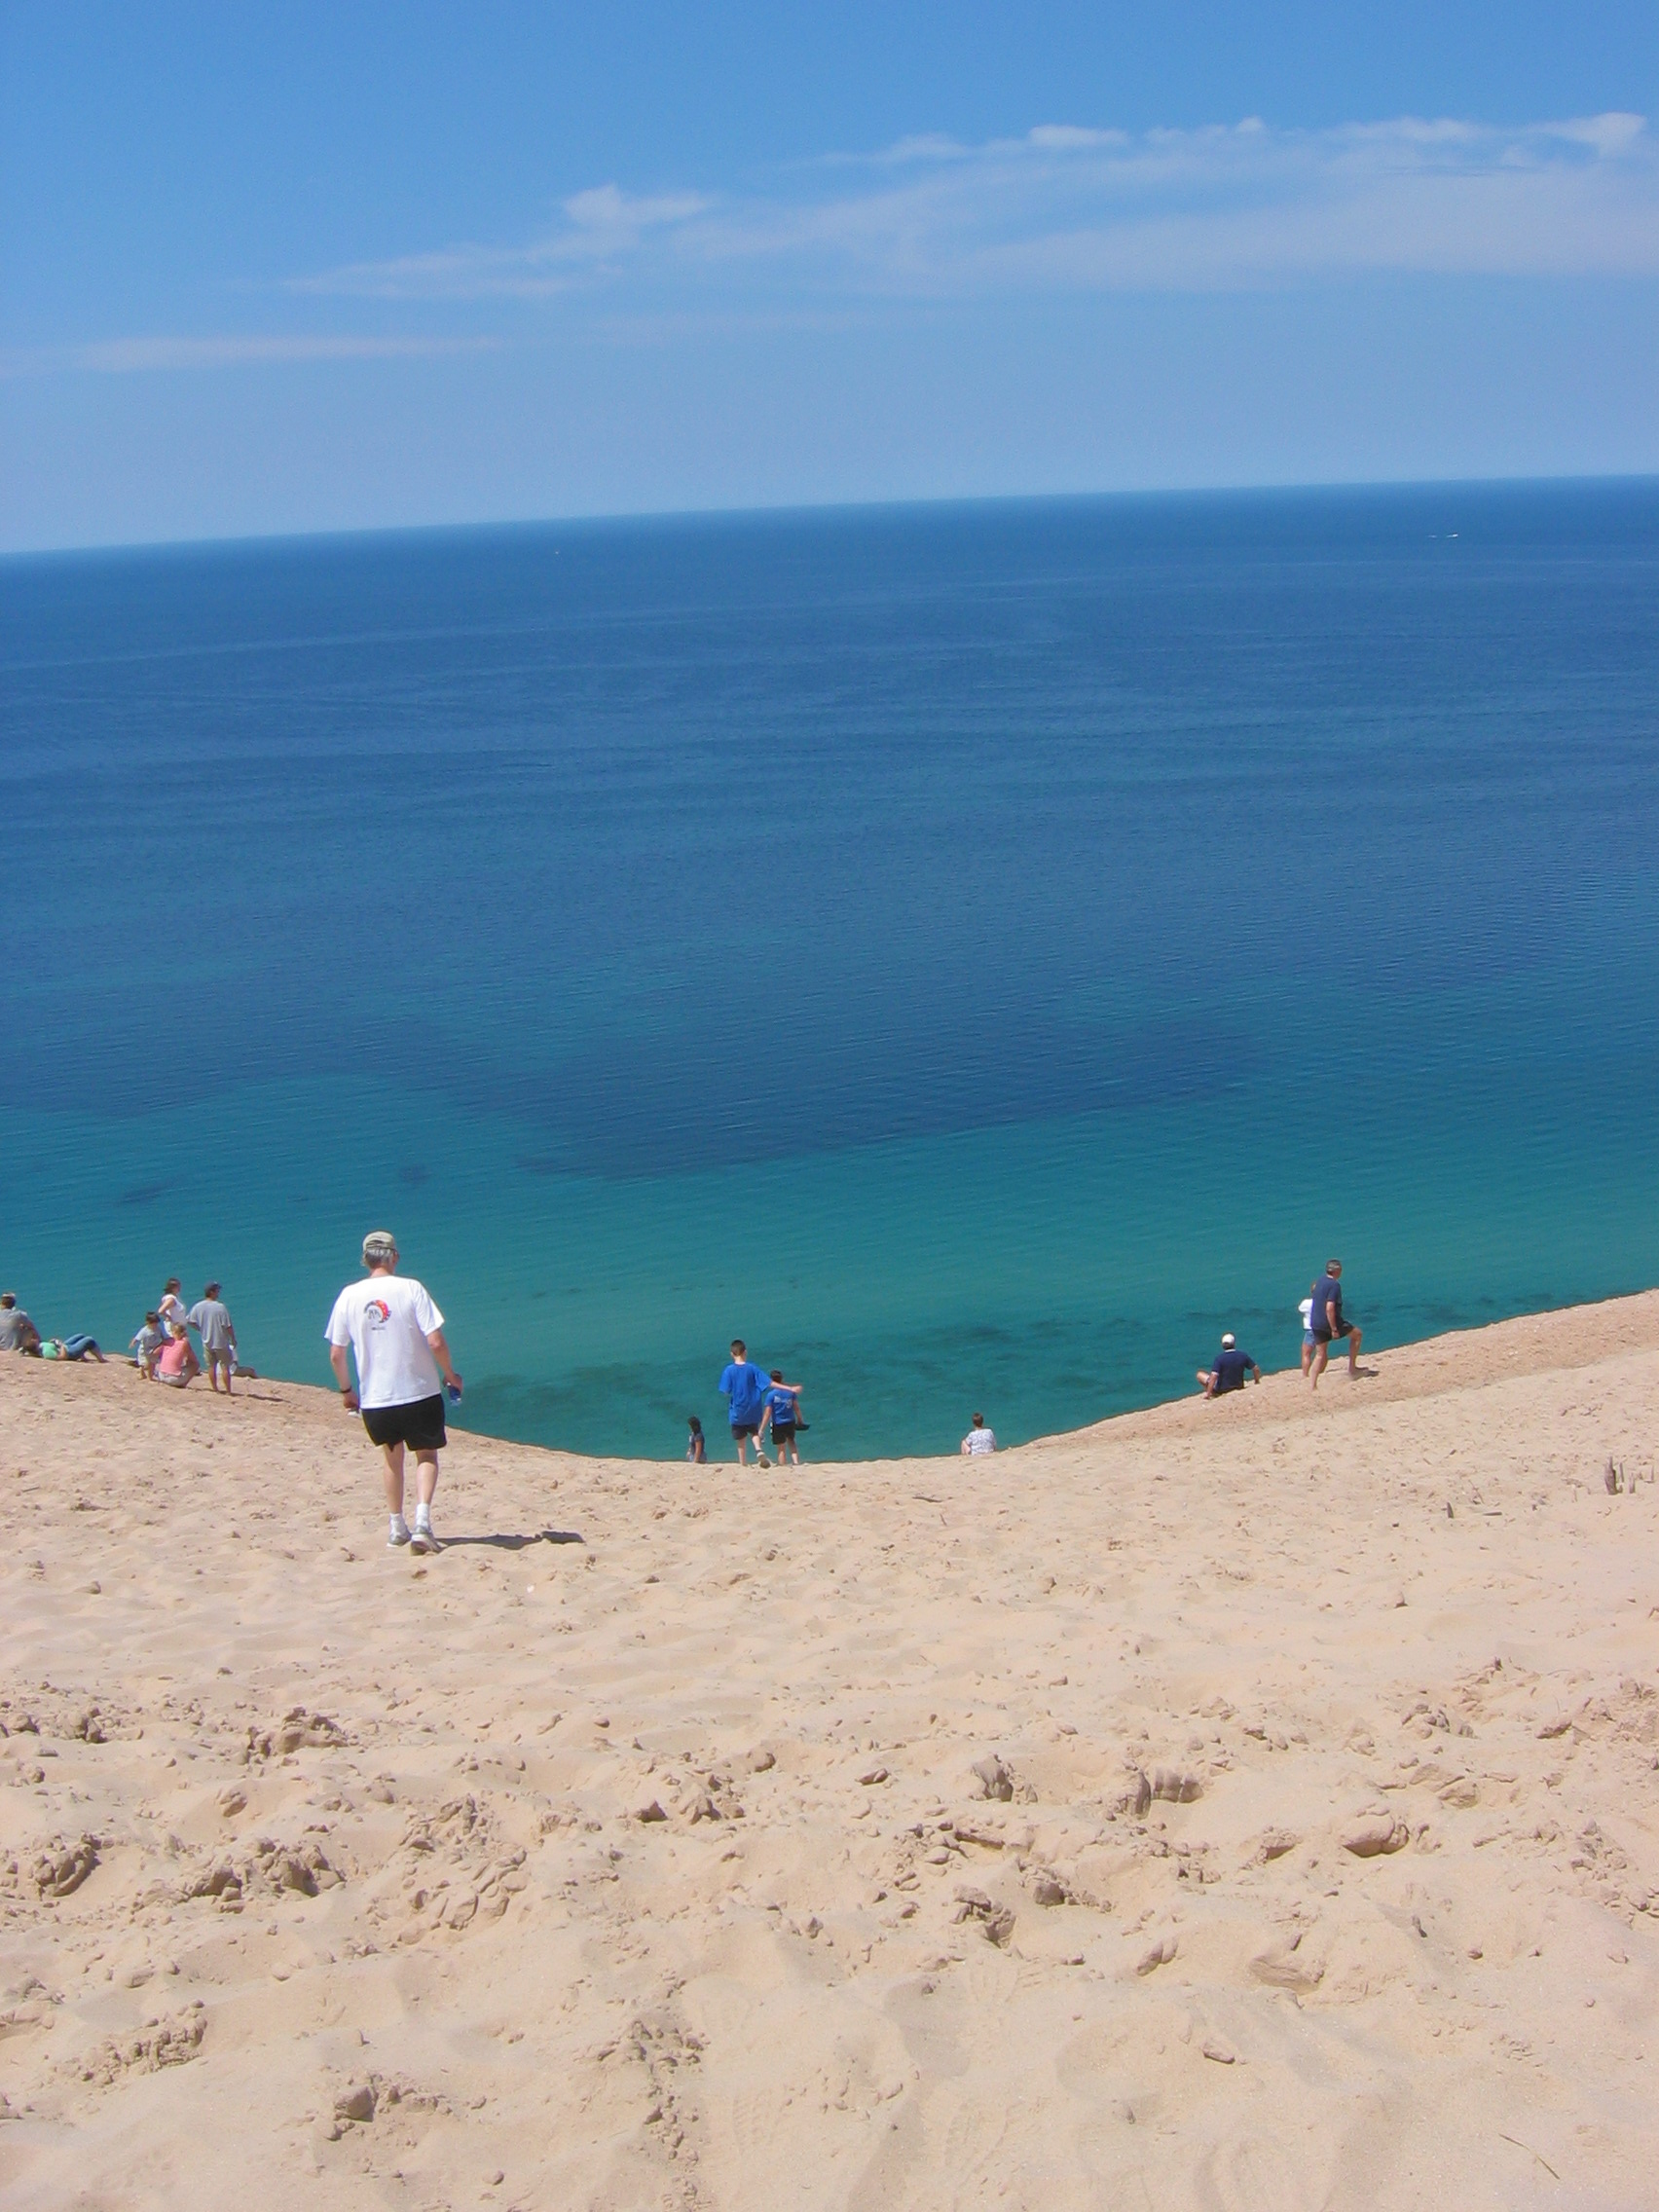 The Edge of the BIG DUNE